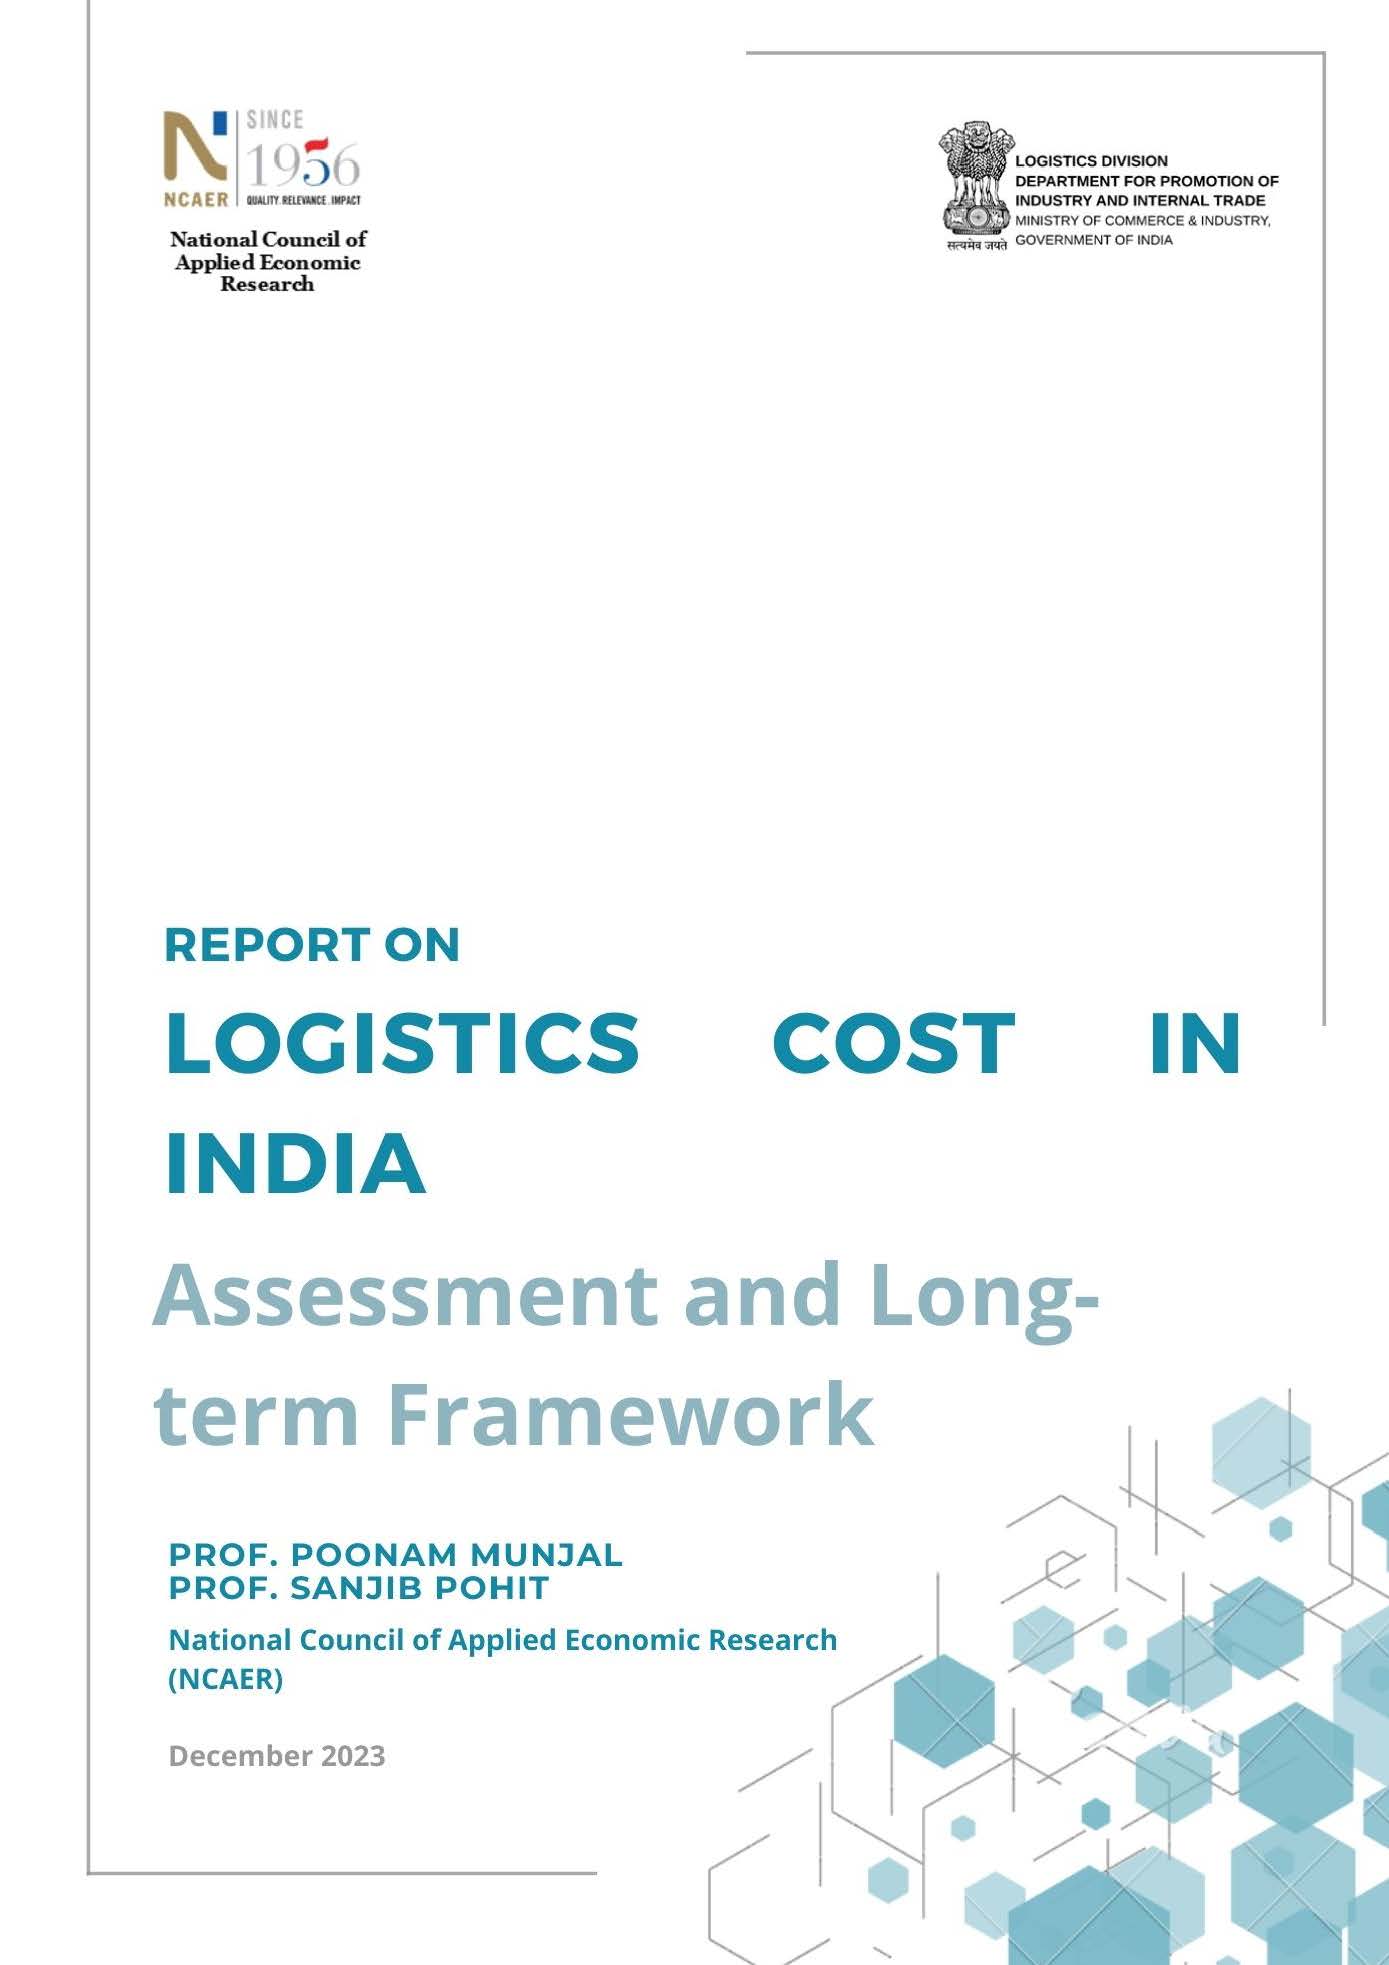 Logistics Cost in India: Assessment and Long-term Framework